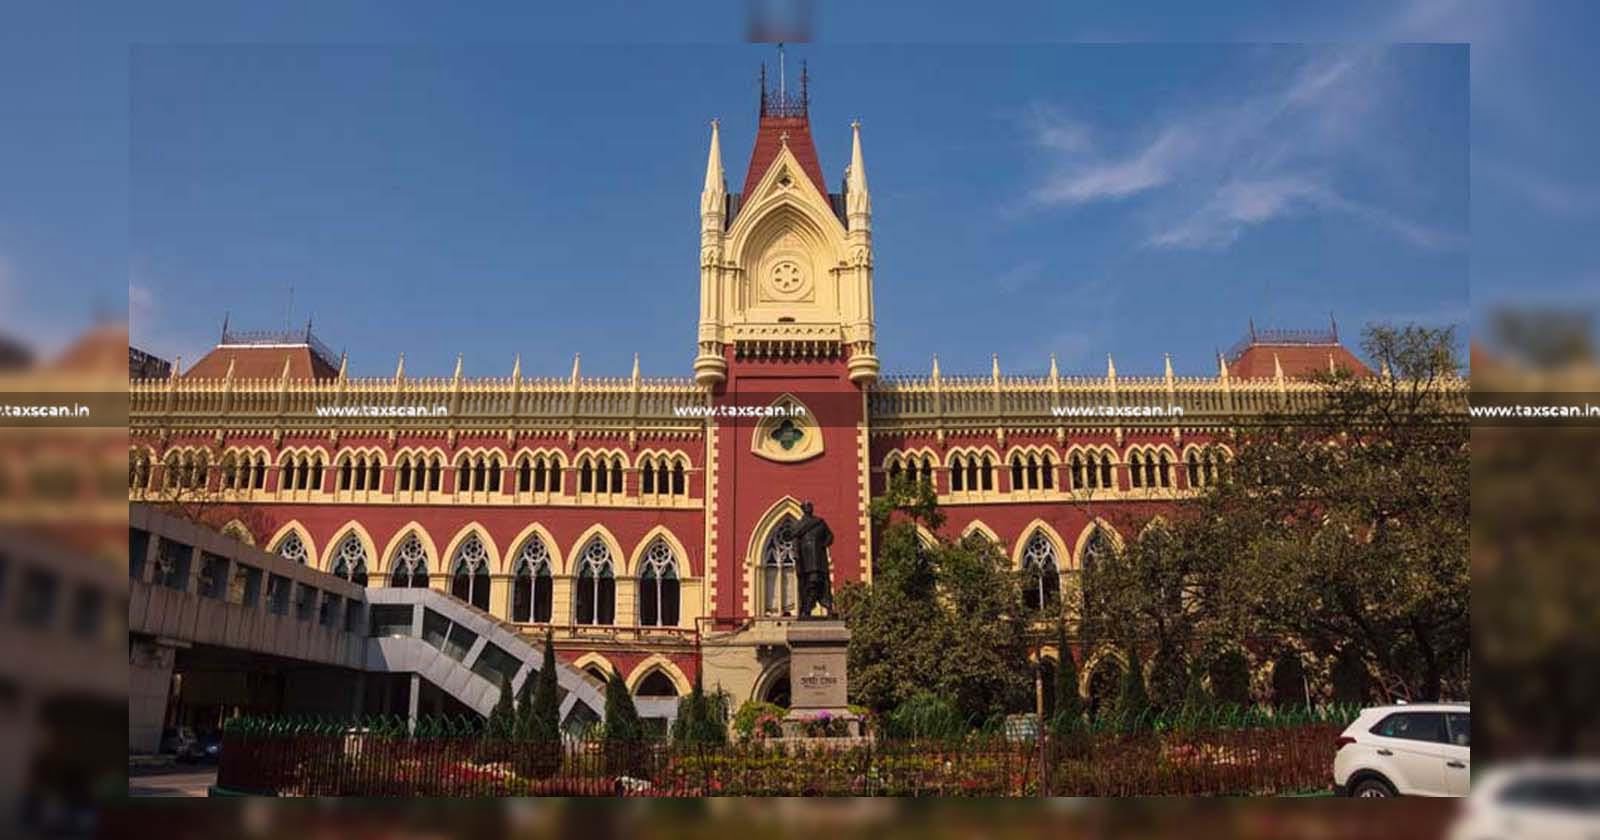 Directors are to Assist Official Liquidator in Affairs of Company - Directors are to Assist Official Liquidator - Winding Up - Calcutta High Court - Revision Petition - taxscan